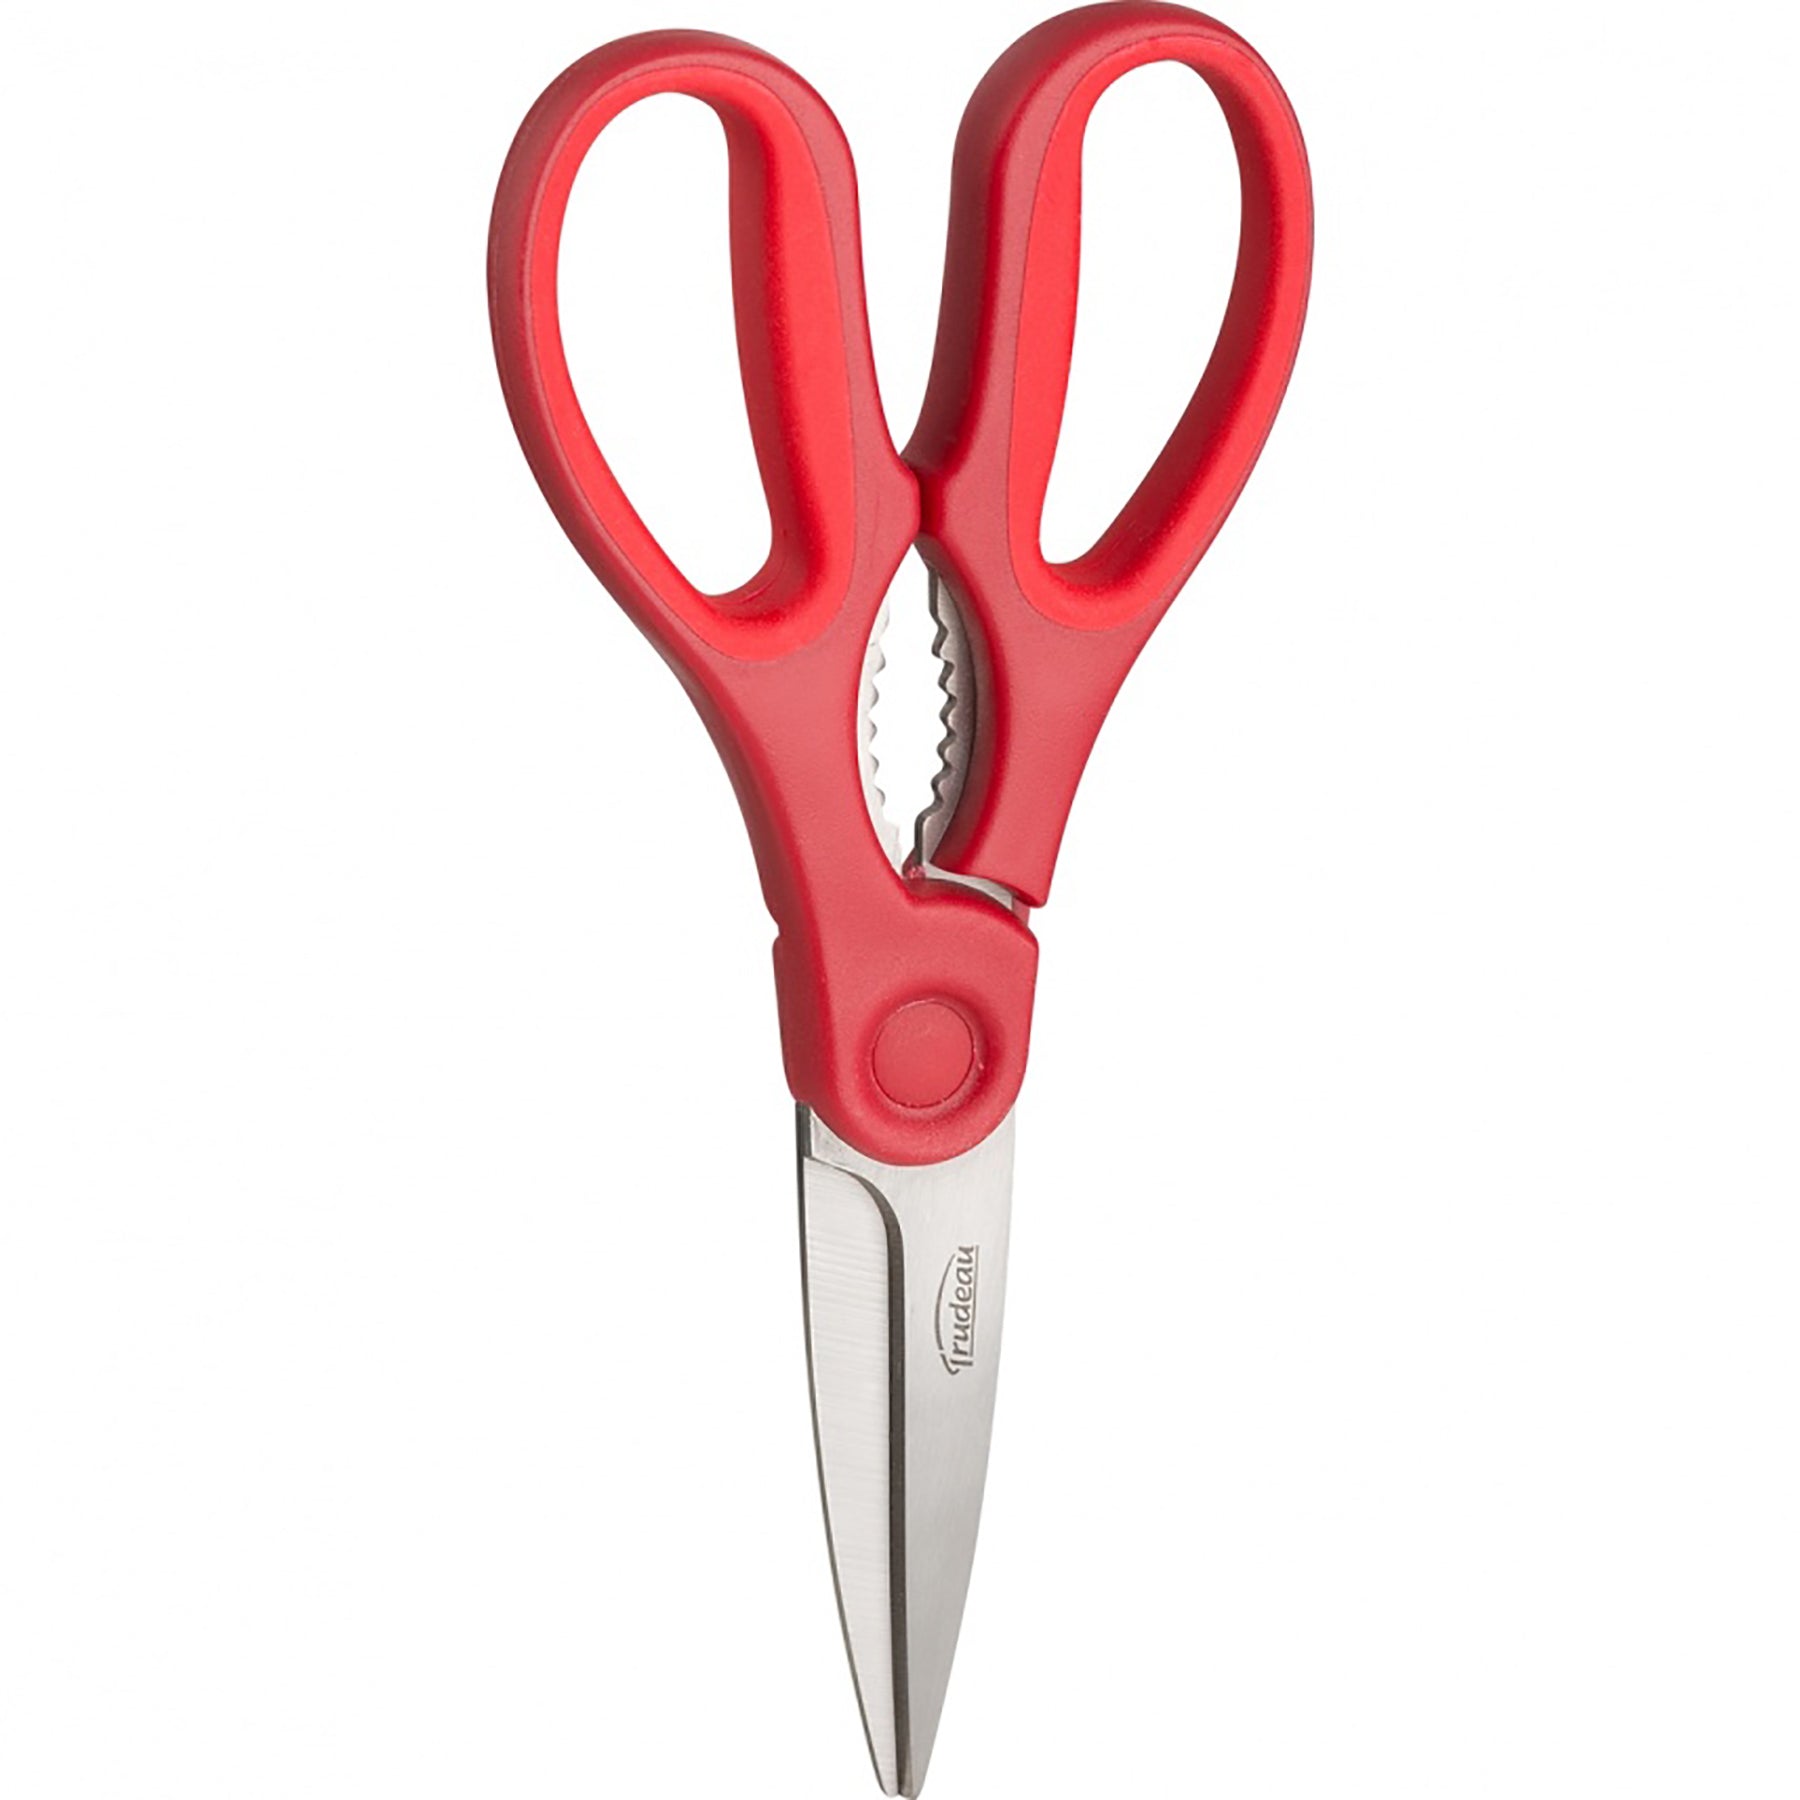 Trudeau Detachable Kitchen Shears Polypropylene and Stainless Steel Blade